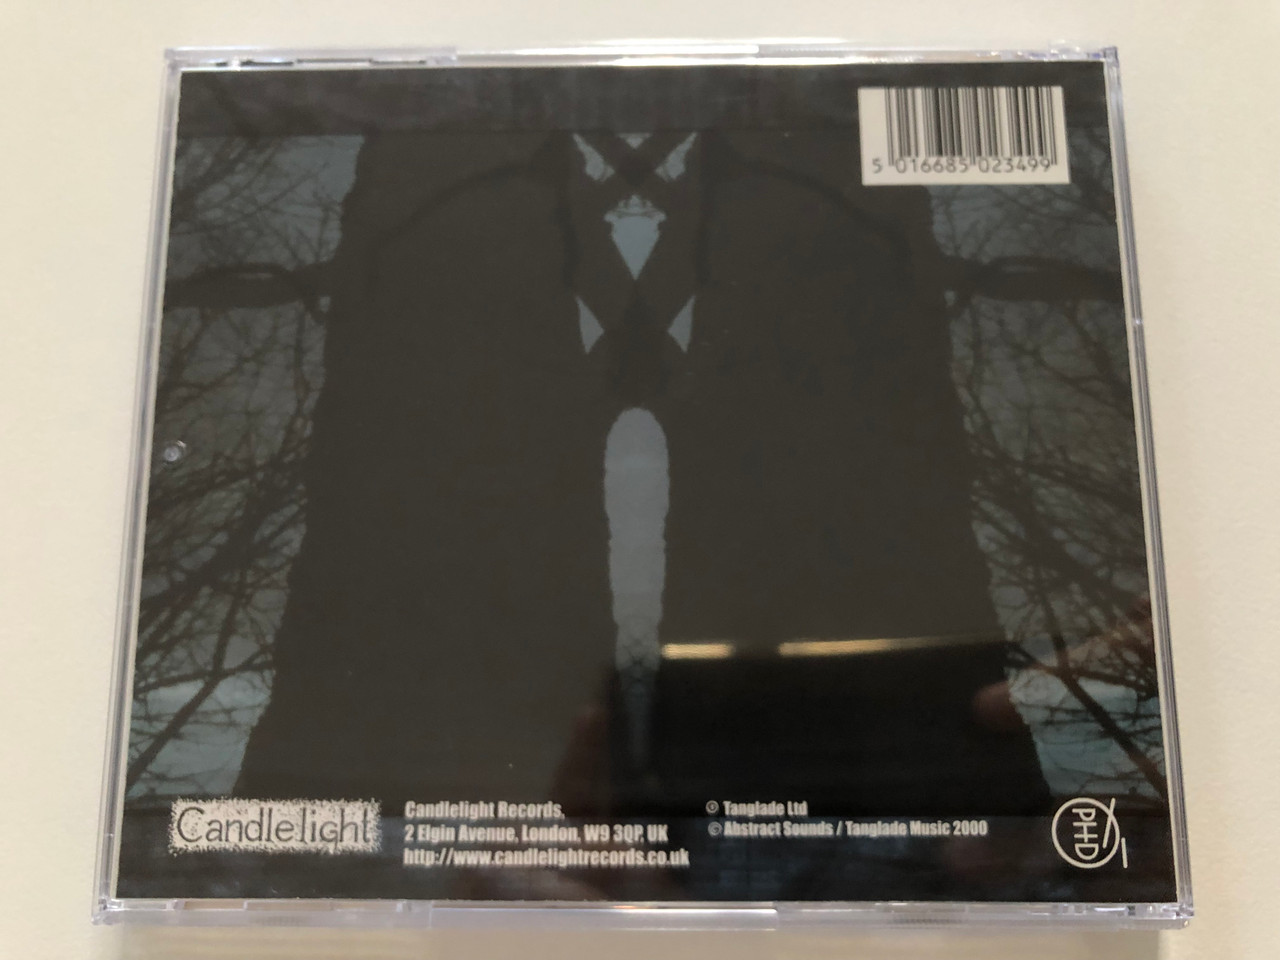 https://cdn10.bigcommerce.com/s-62bdpkt7pb/products/30977/images/182633/Thou_Shalt_Suffer_Somnium_Candlelight_Records_Audio_CD_2000_Candle049CD_4__24292.1624609239.1280.1280.JPG?c=2